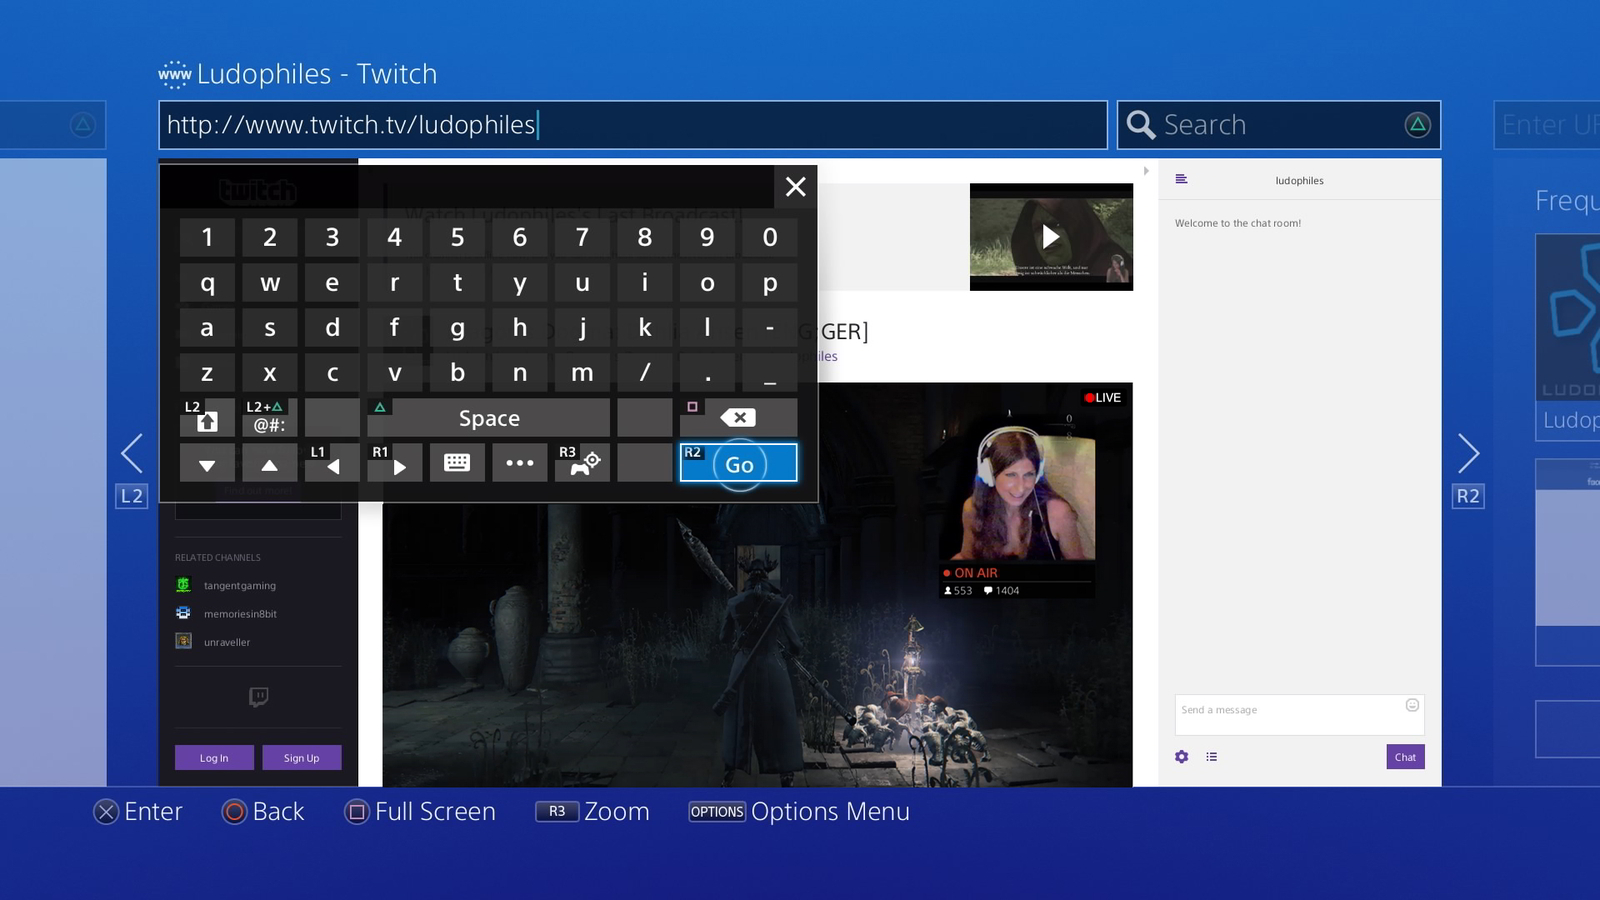 Watch-Twitch-Streams-on-PS4-in-Browser-02-URL.jpg